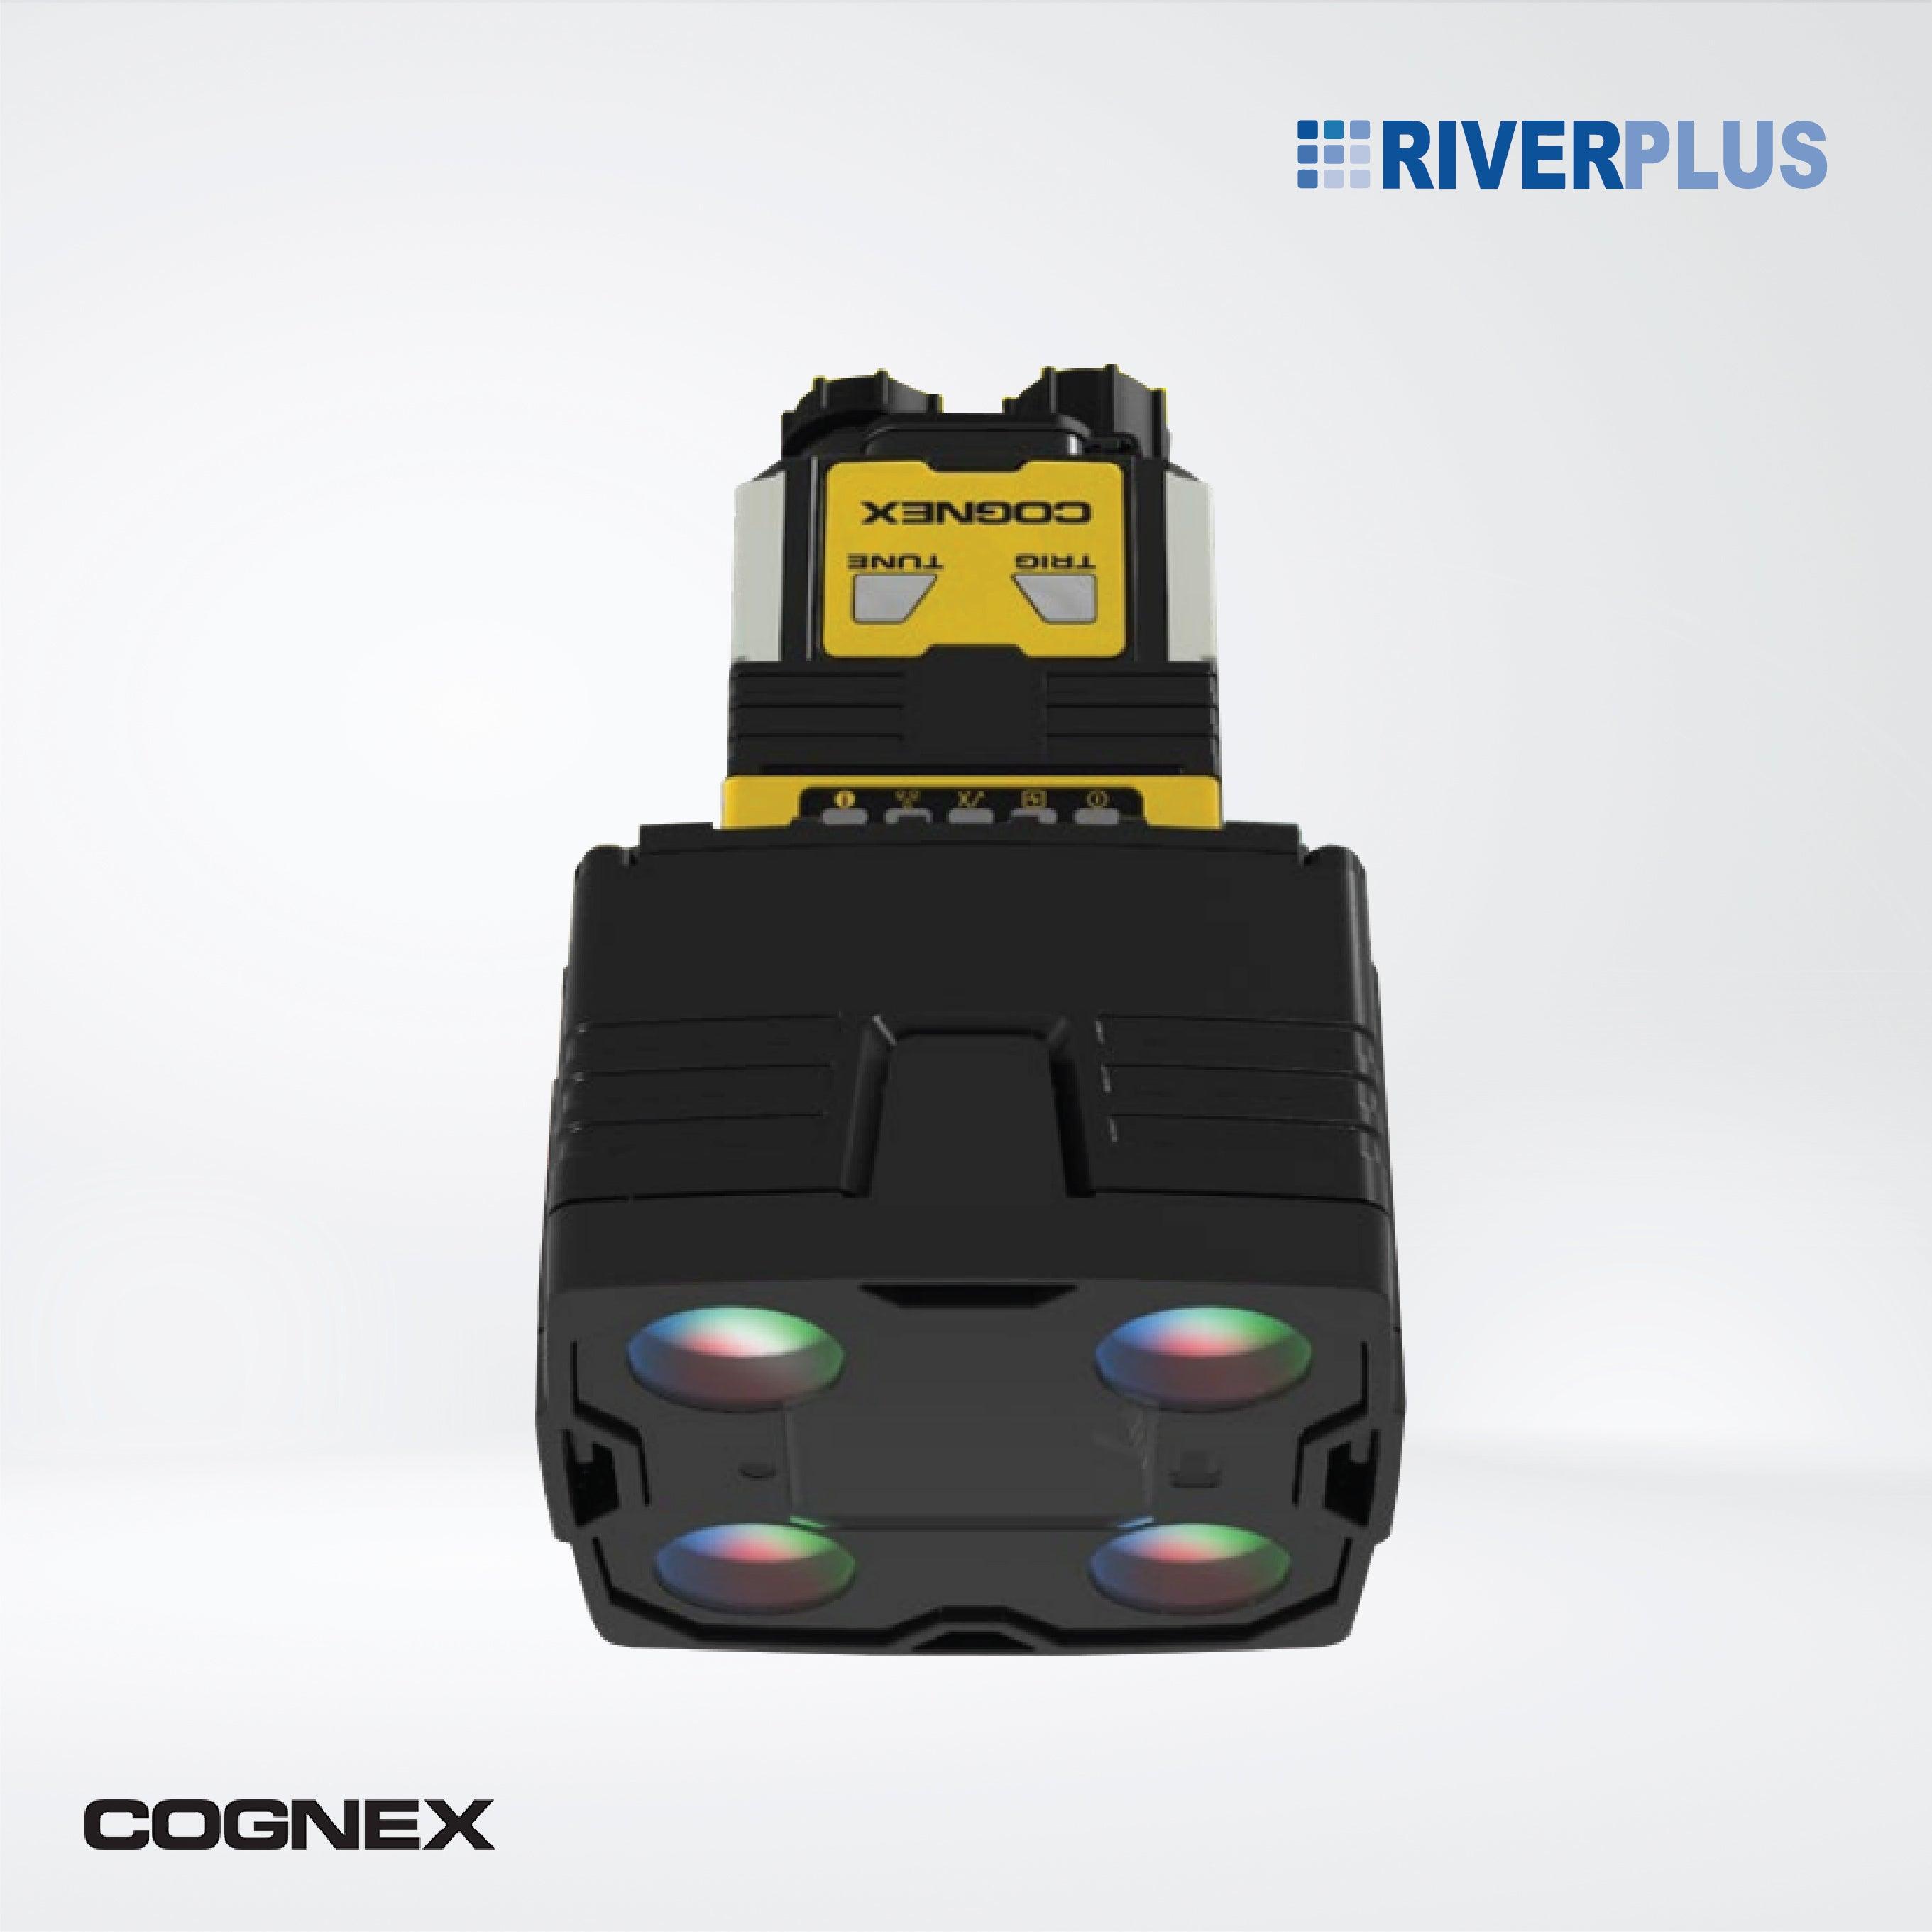 In-Sight 2800 vision system Automate error detection in minutes – no experience required - Riverplus